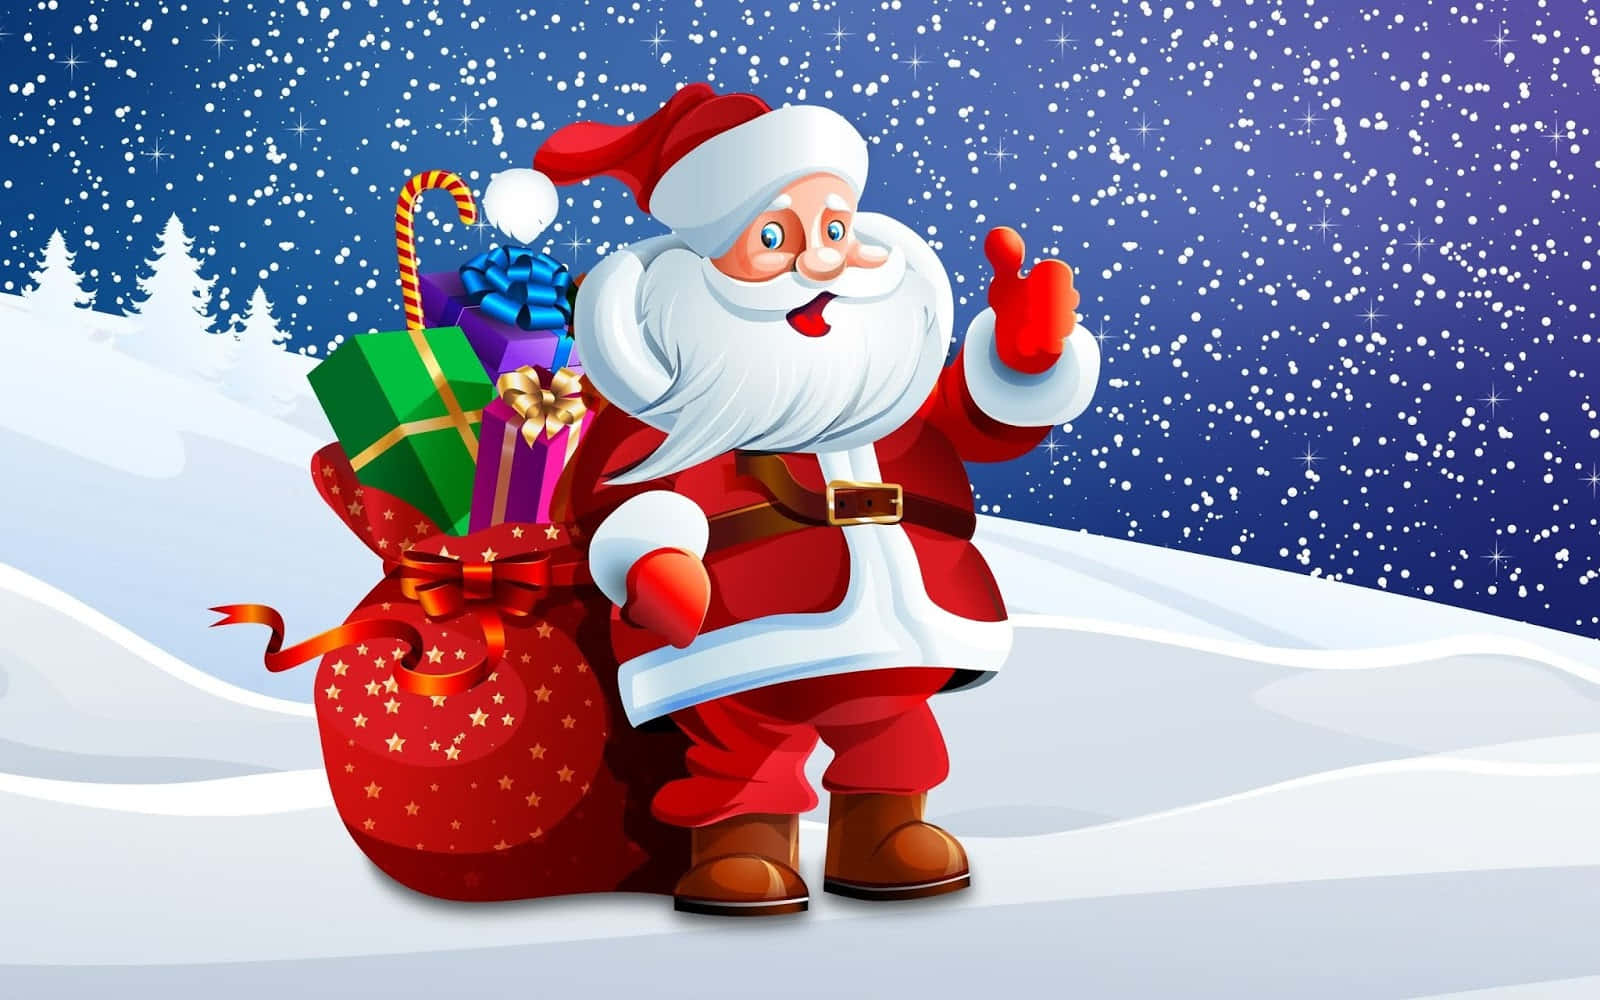 Christmas Cartoon Santa Claus Snowing Holiday Picture